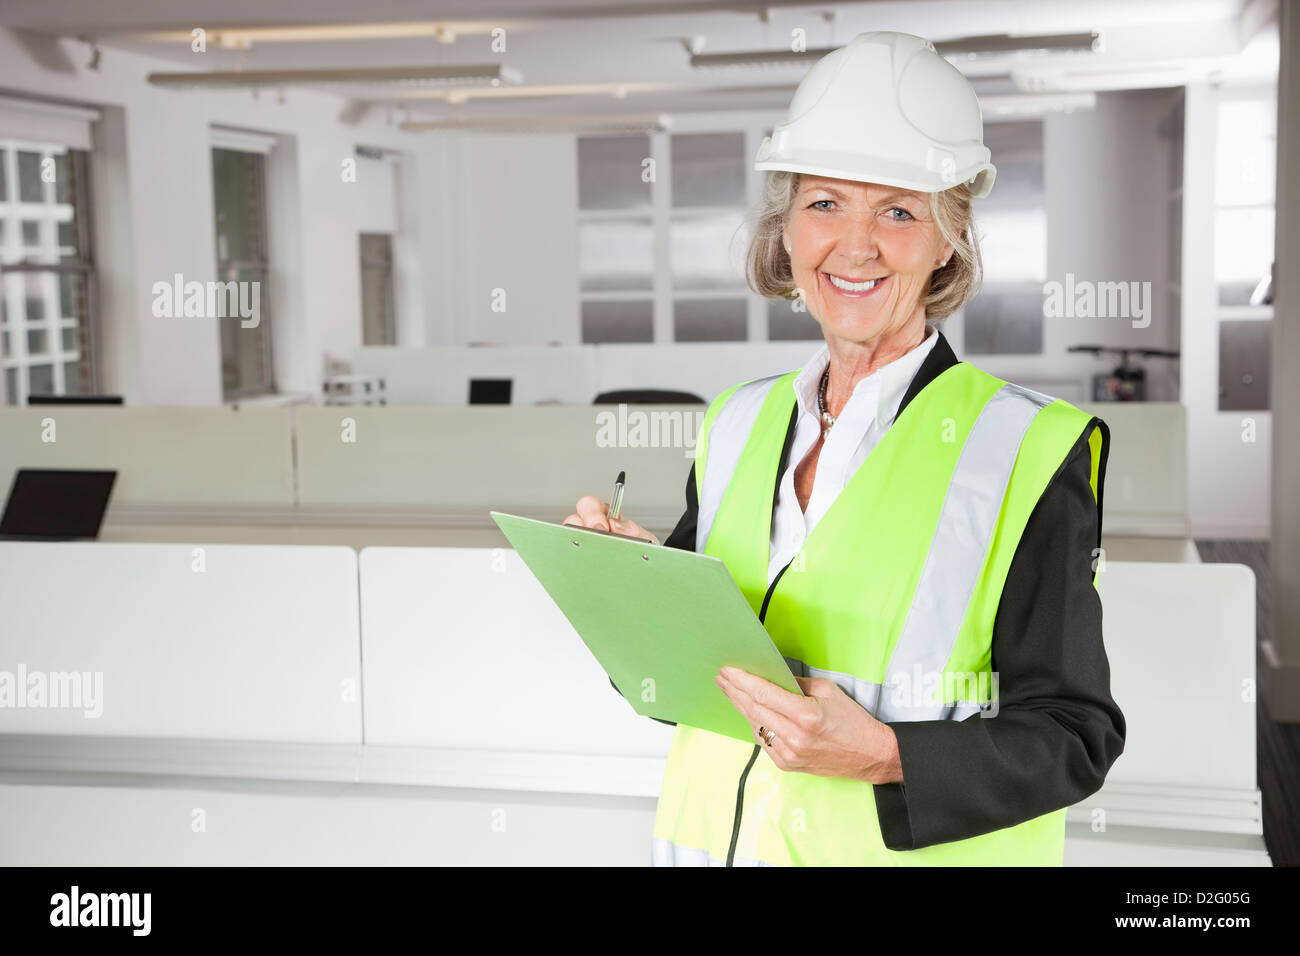 Portrait of smiling senior woman in reflector vest and hard hat holding clipboard at office Stock Photo